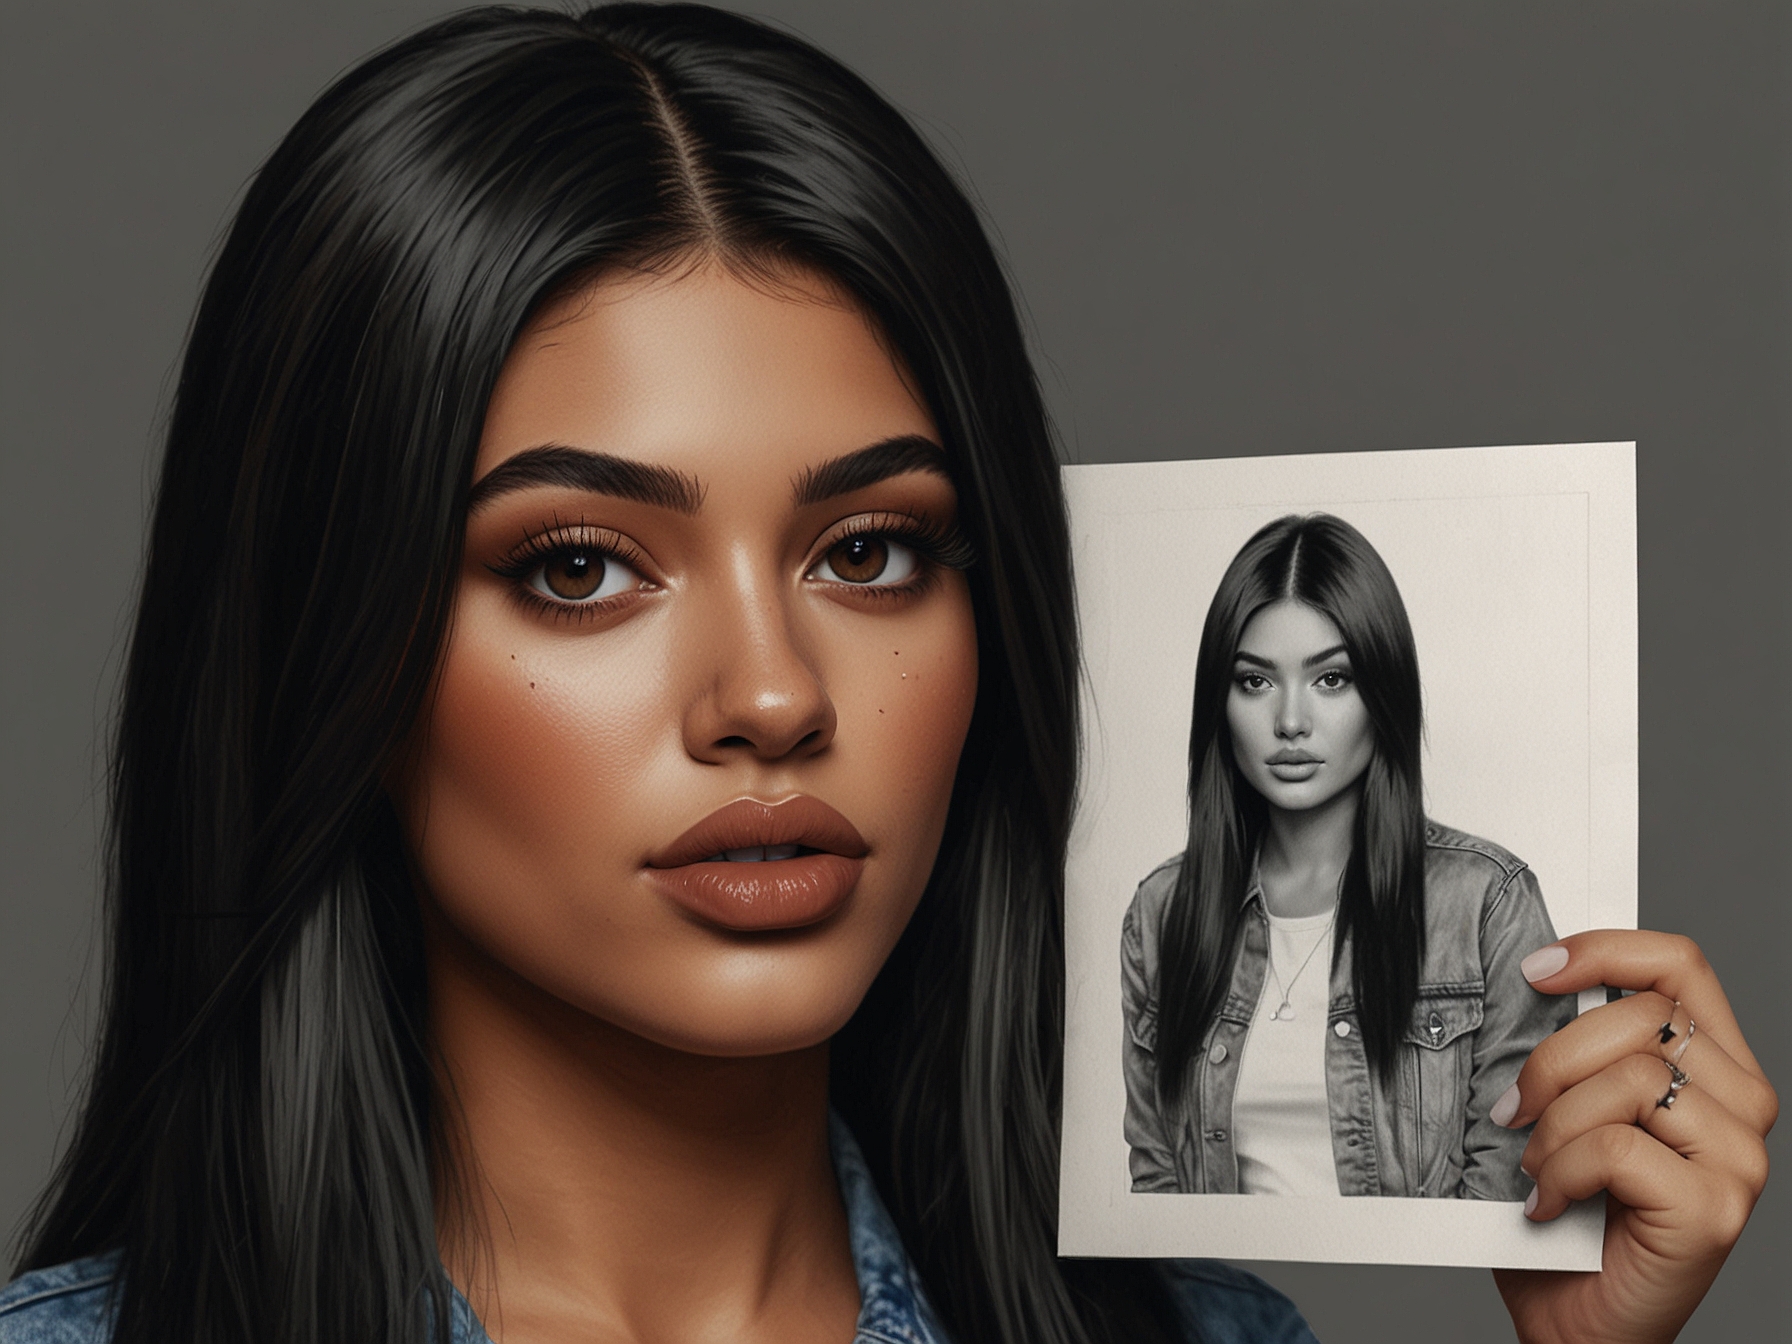 A close-up of Alliyah showing her holding a photo of Kylie Jenner. Her face reflects both admiration and determination, symbolizing her internal struggle with self-image and societal beauty standards.